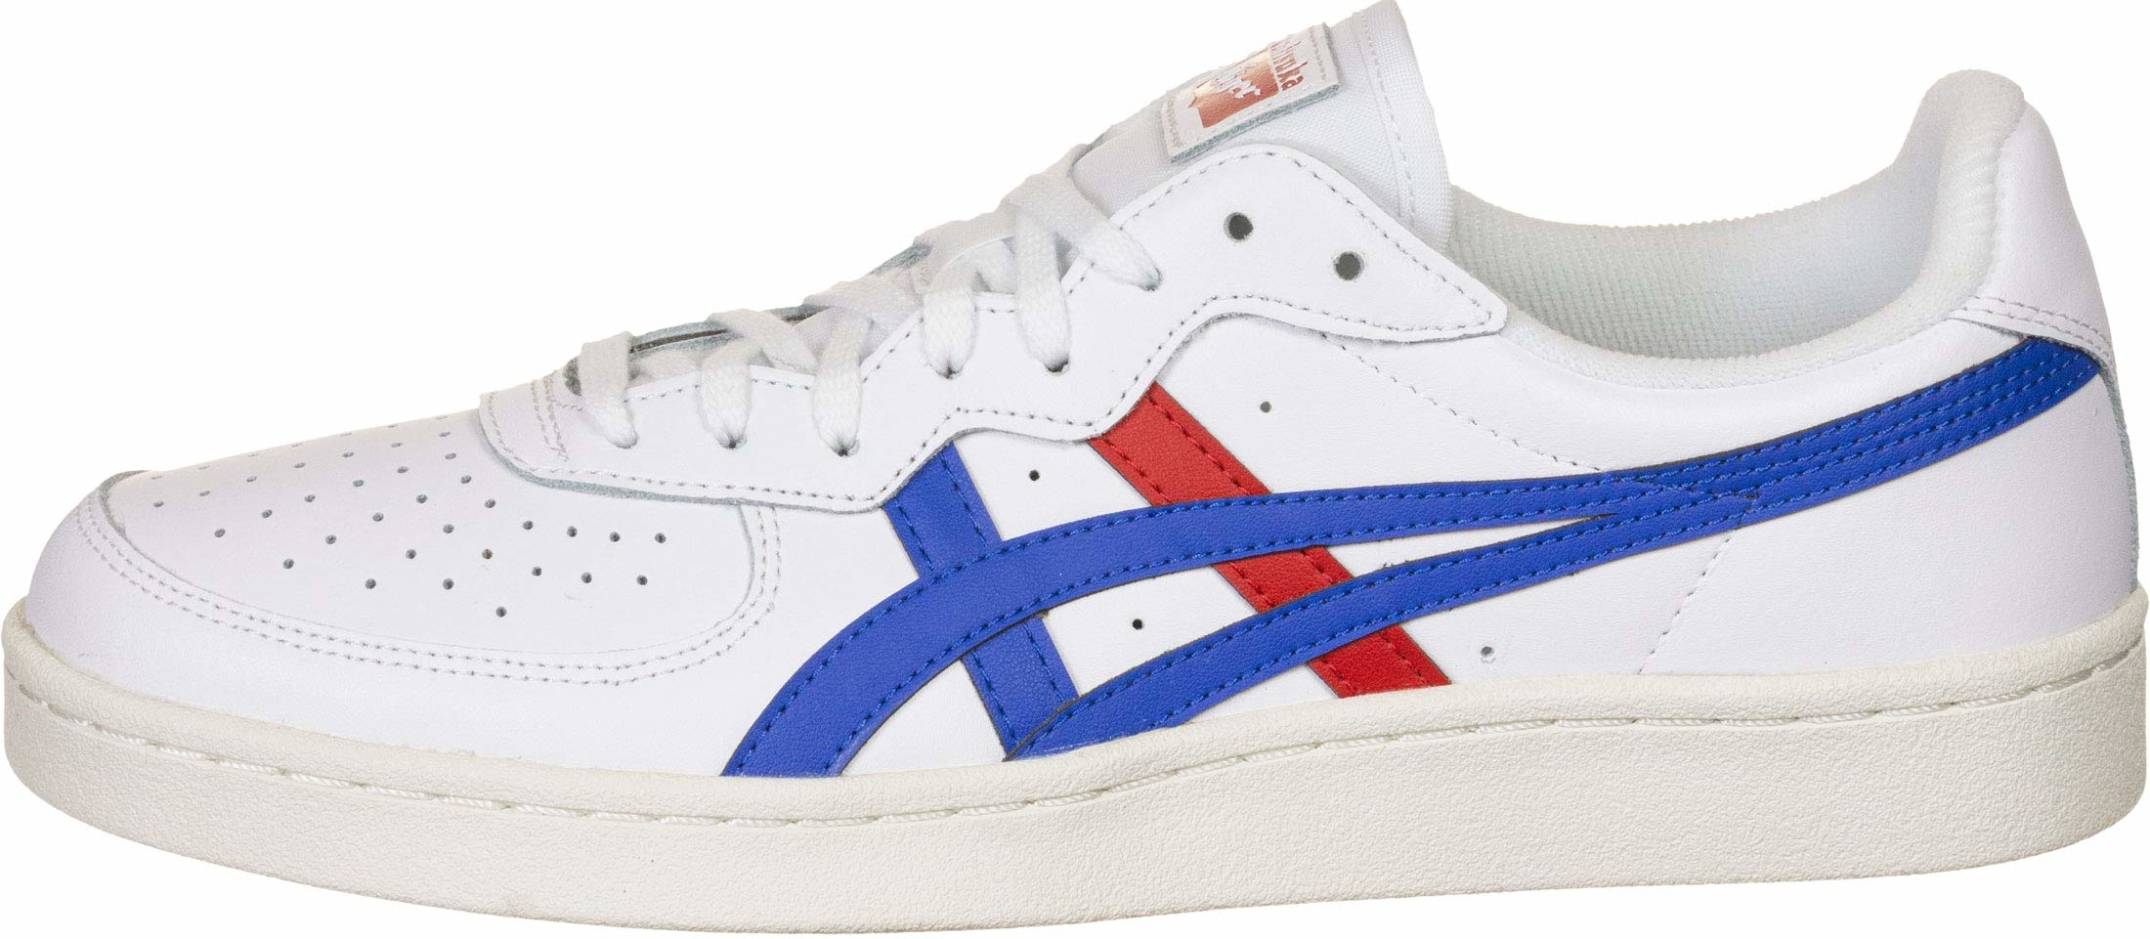 Only $55 + Review of Onitsuka Tiger GSM 